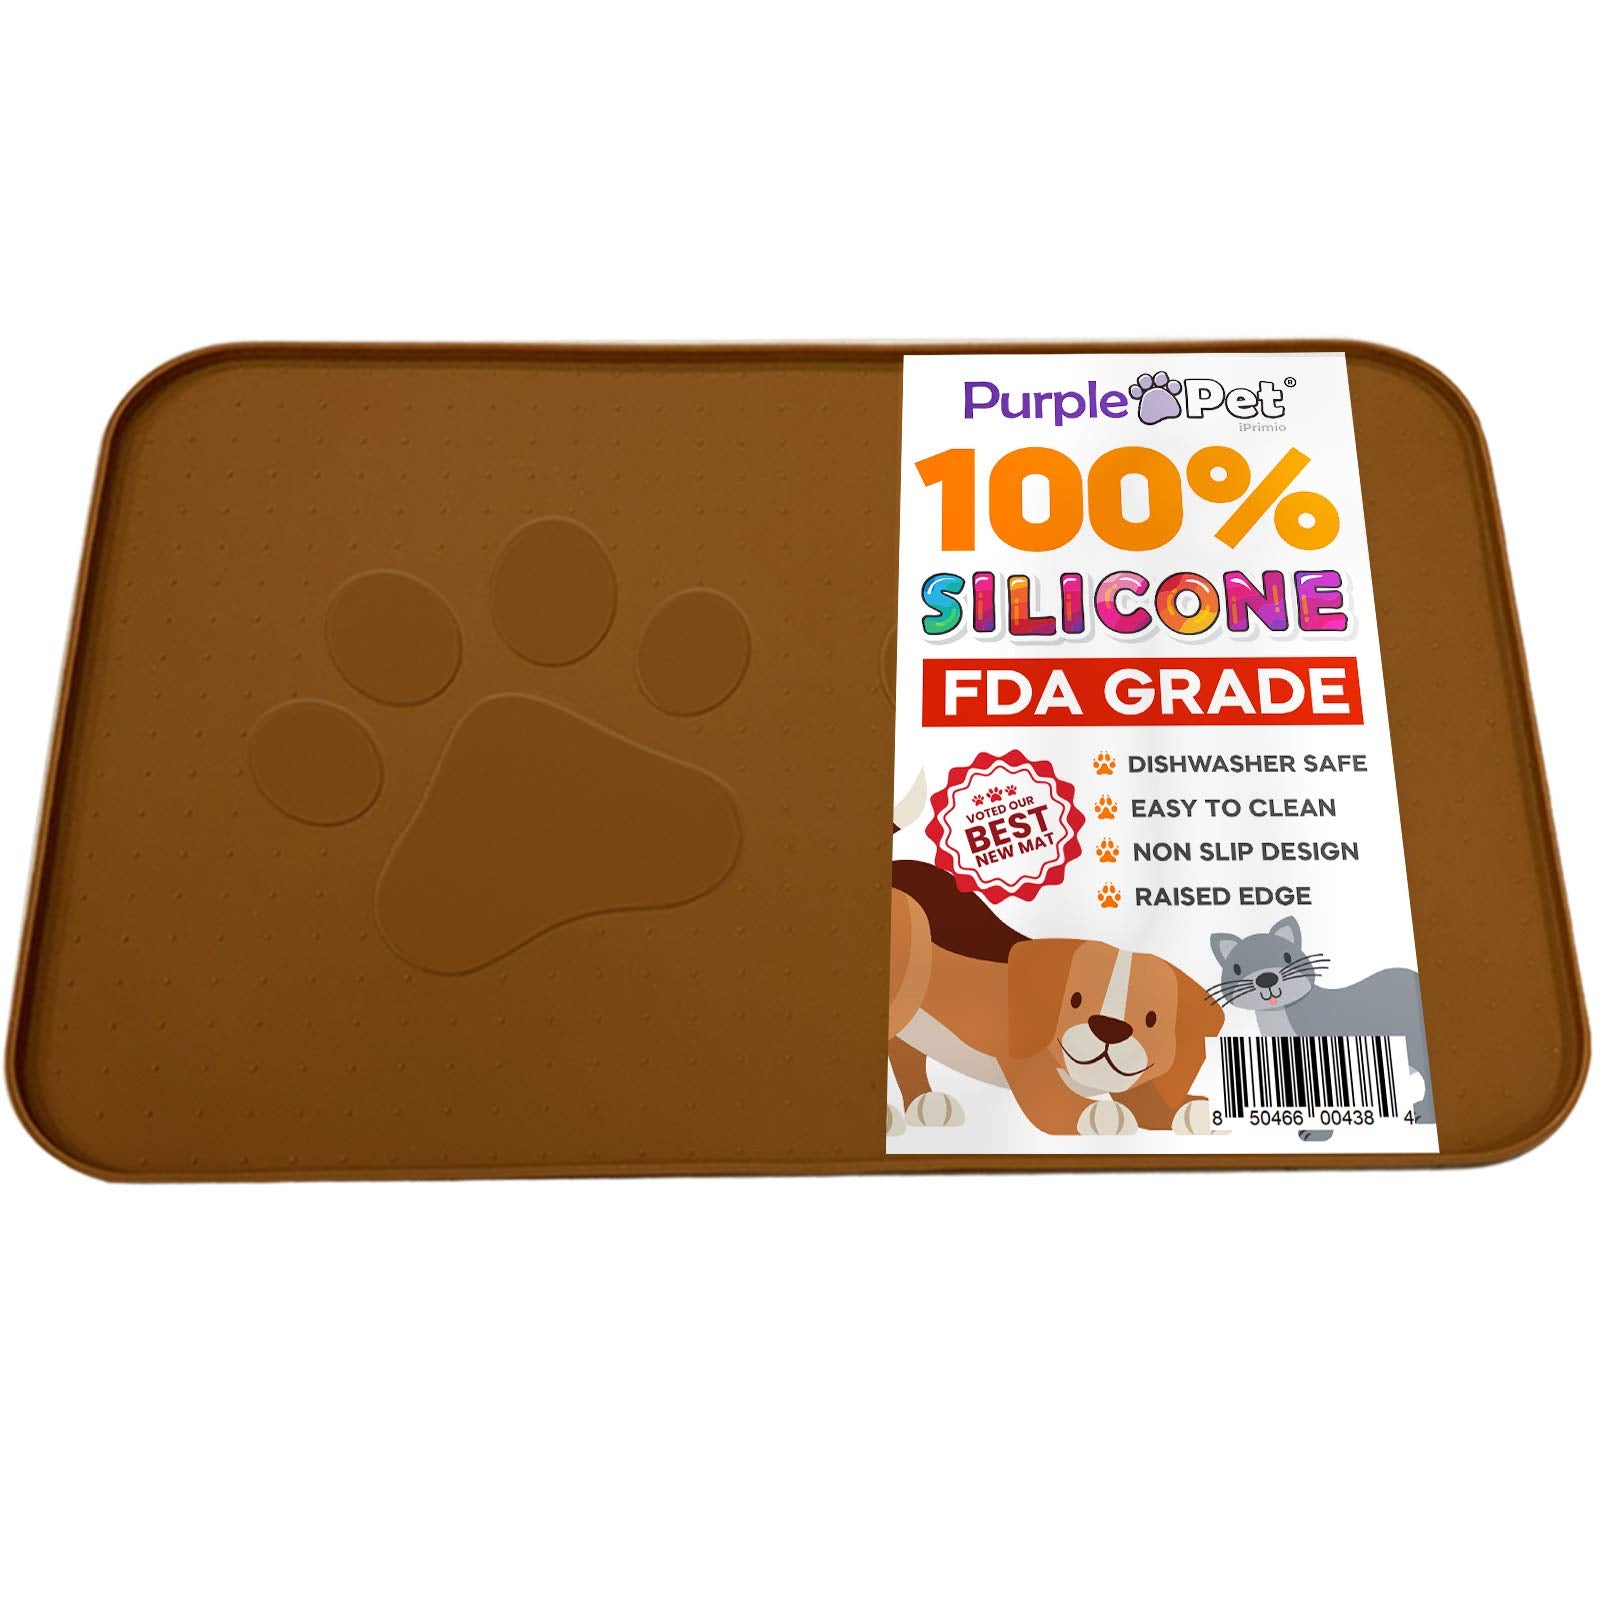 Extra Large Pet Feeding Bowl Mat with Logo - FDA Silicone - Hygienic and Safe for Allergic Dogs and Cats - Prevent Pet Water Food Spills - Spill Edge Protect Floor - Non Slip  - Like New